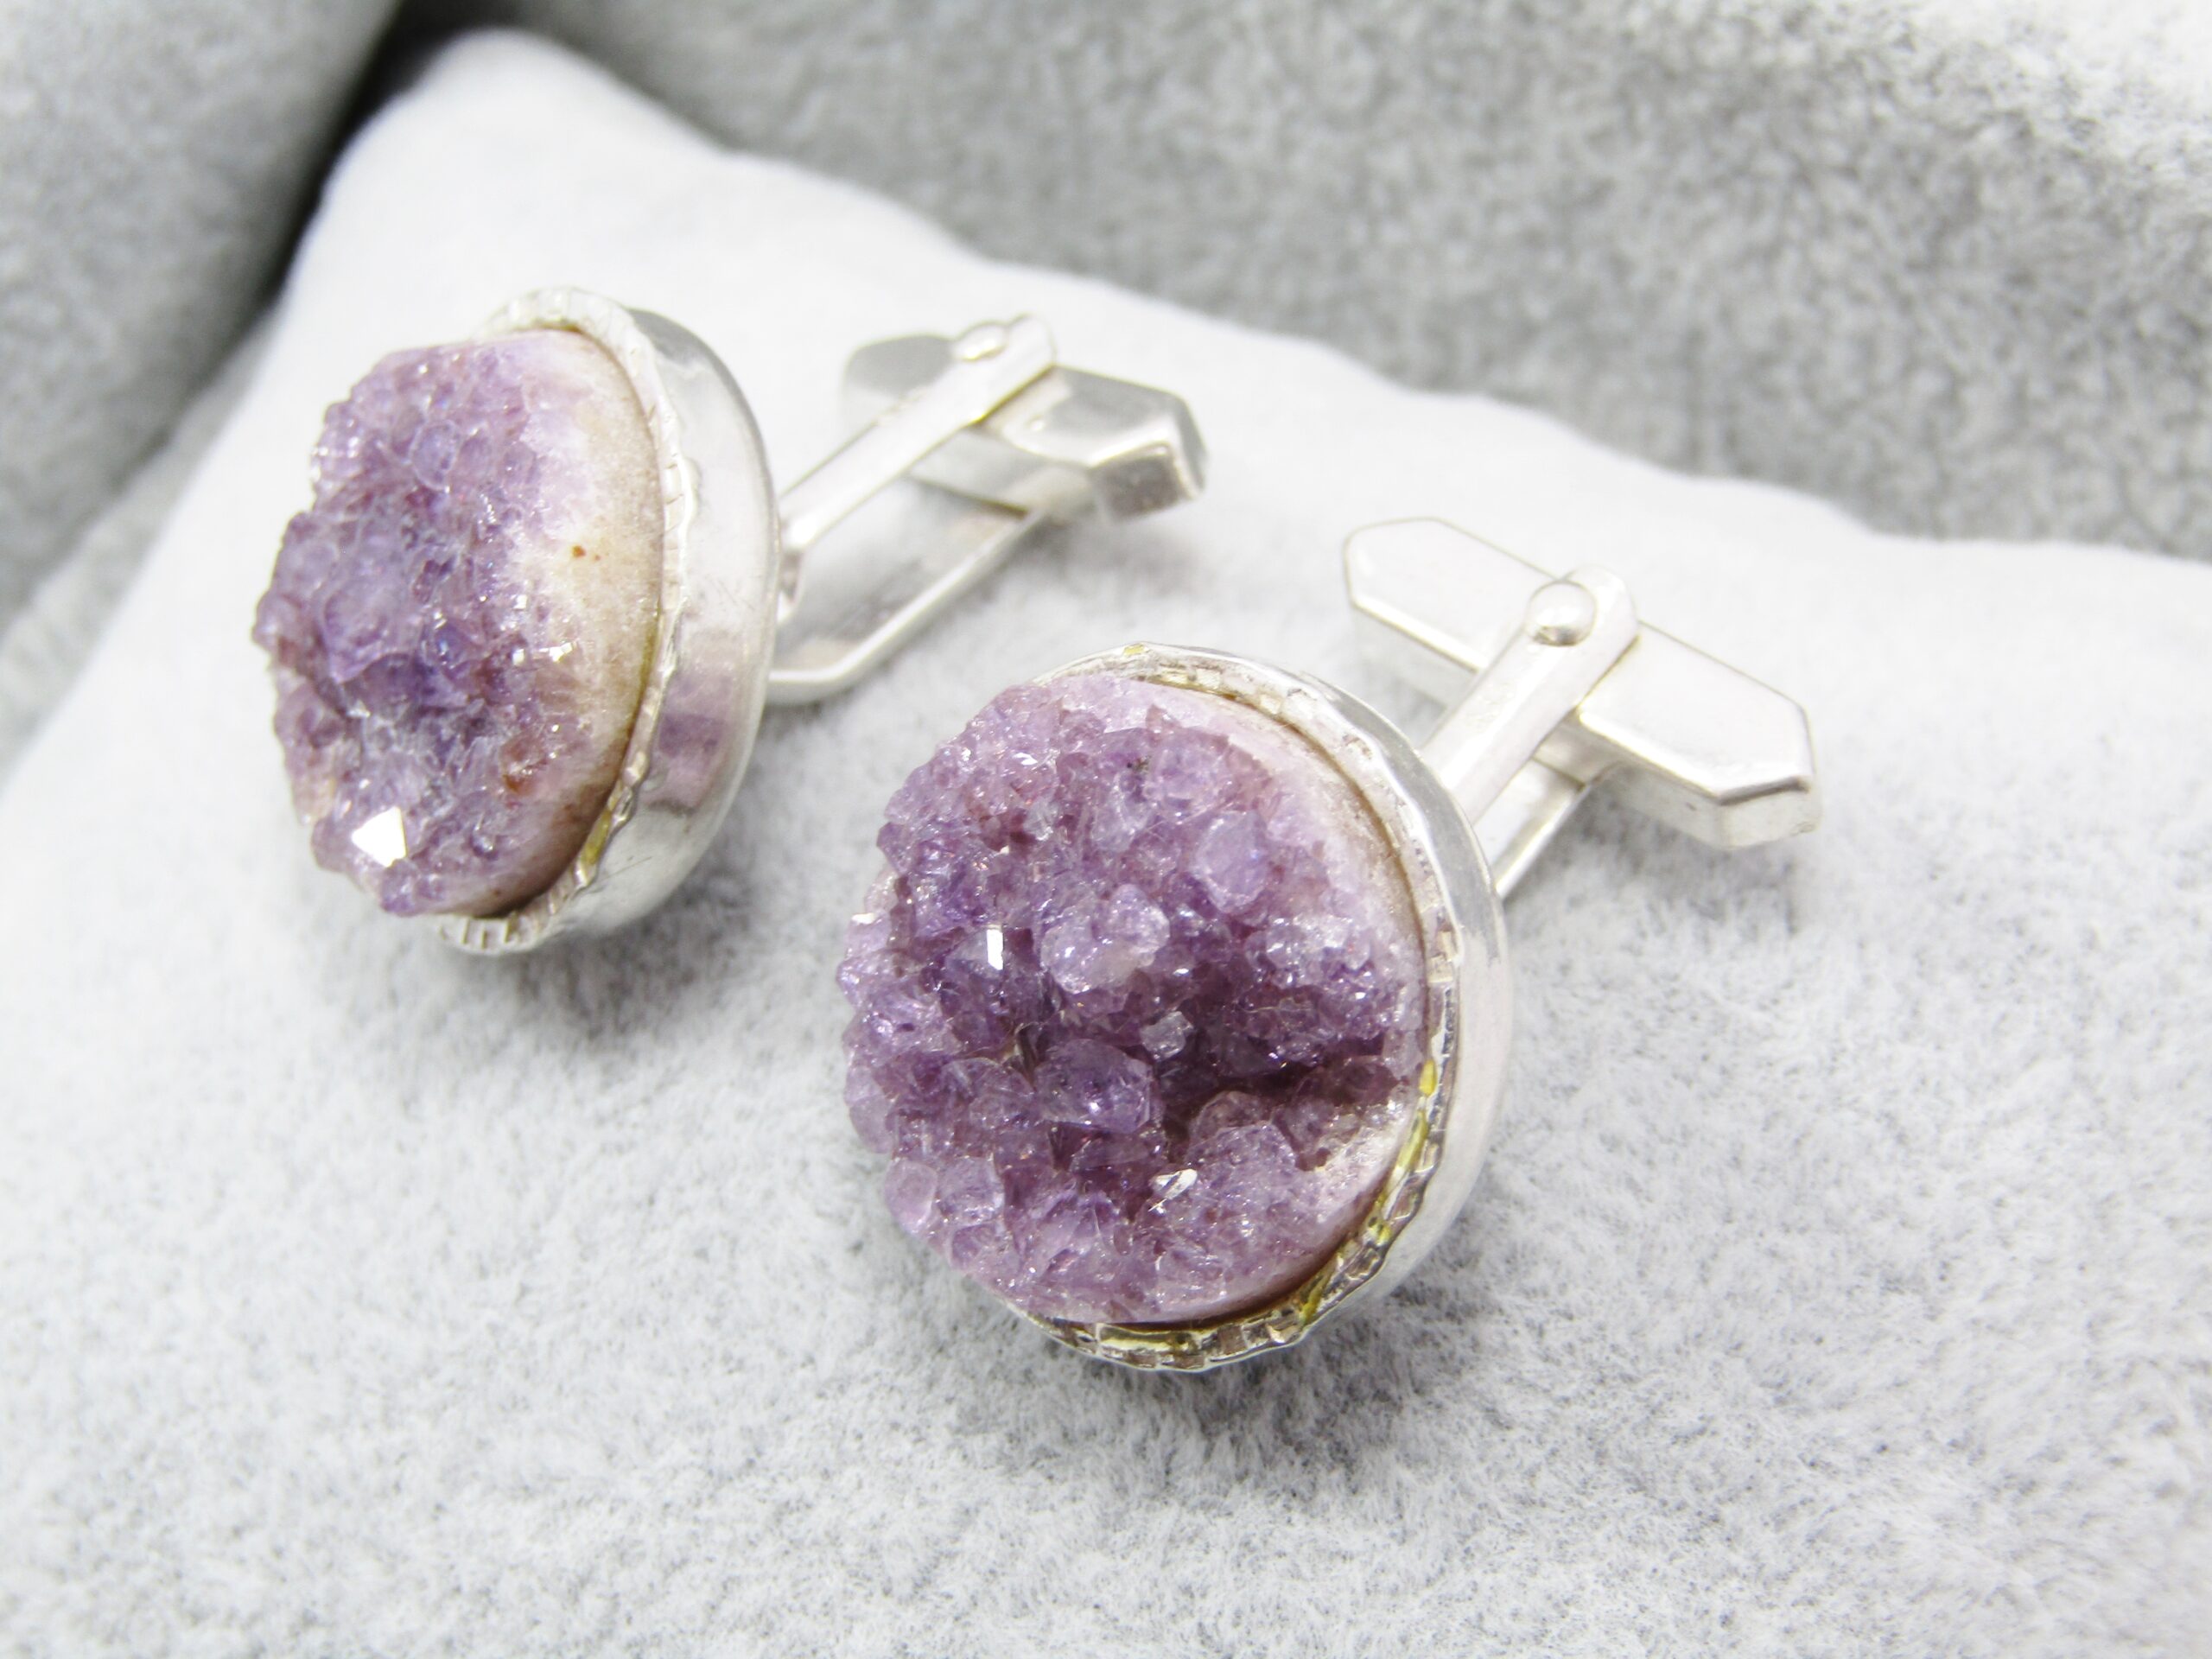 A Stunning Pair of Rock Crystal Cuff Links in Sterling Silver.